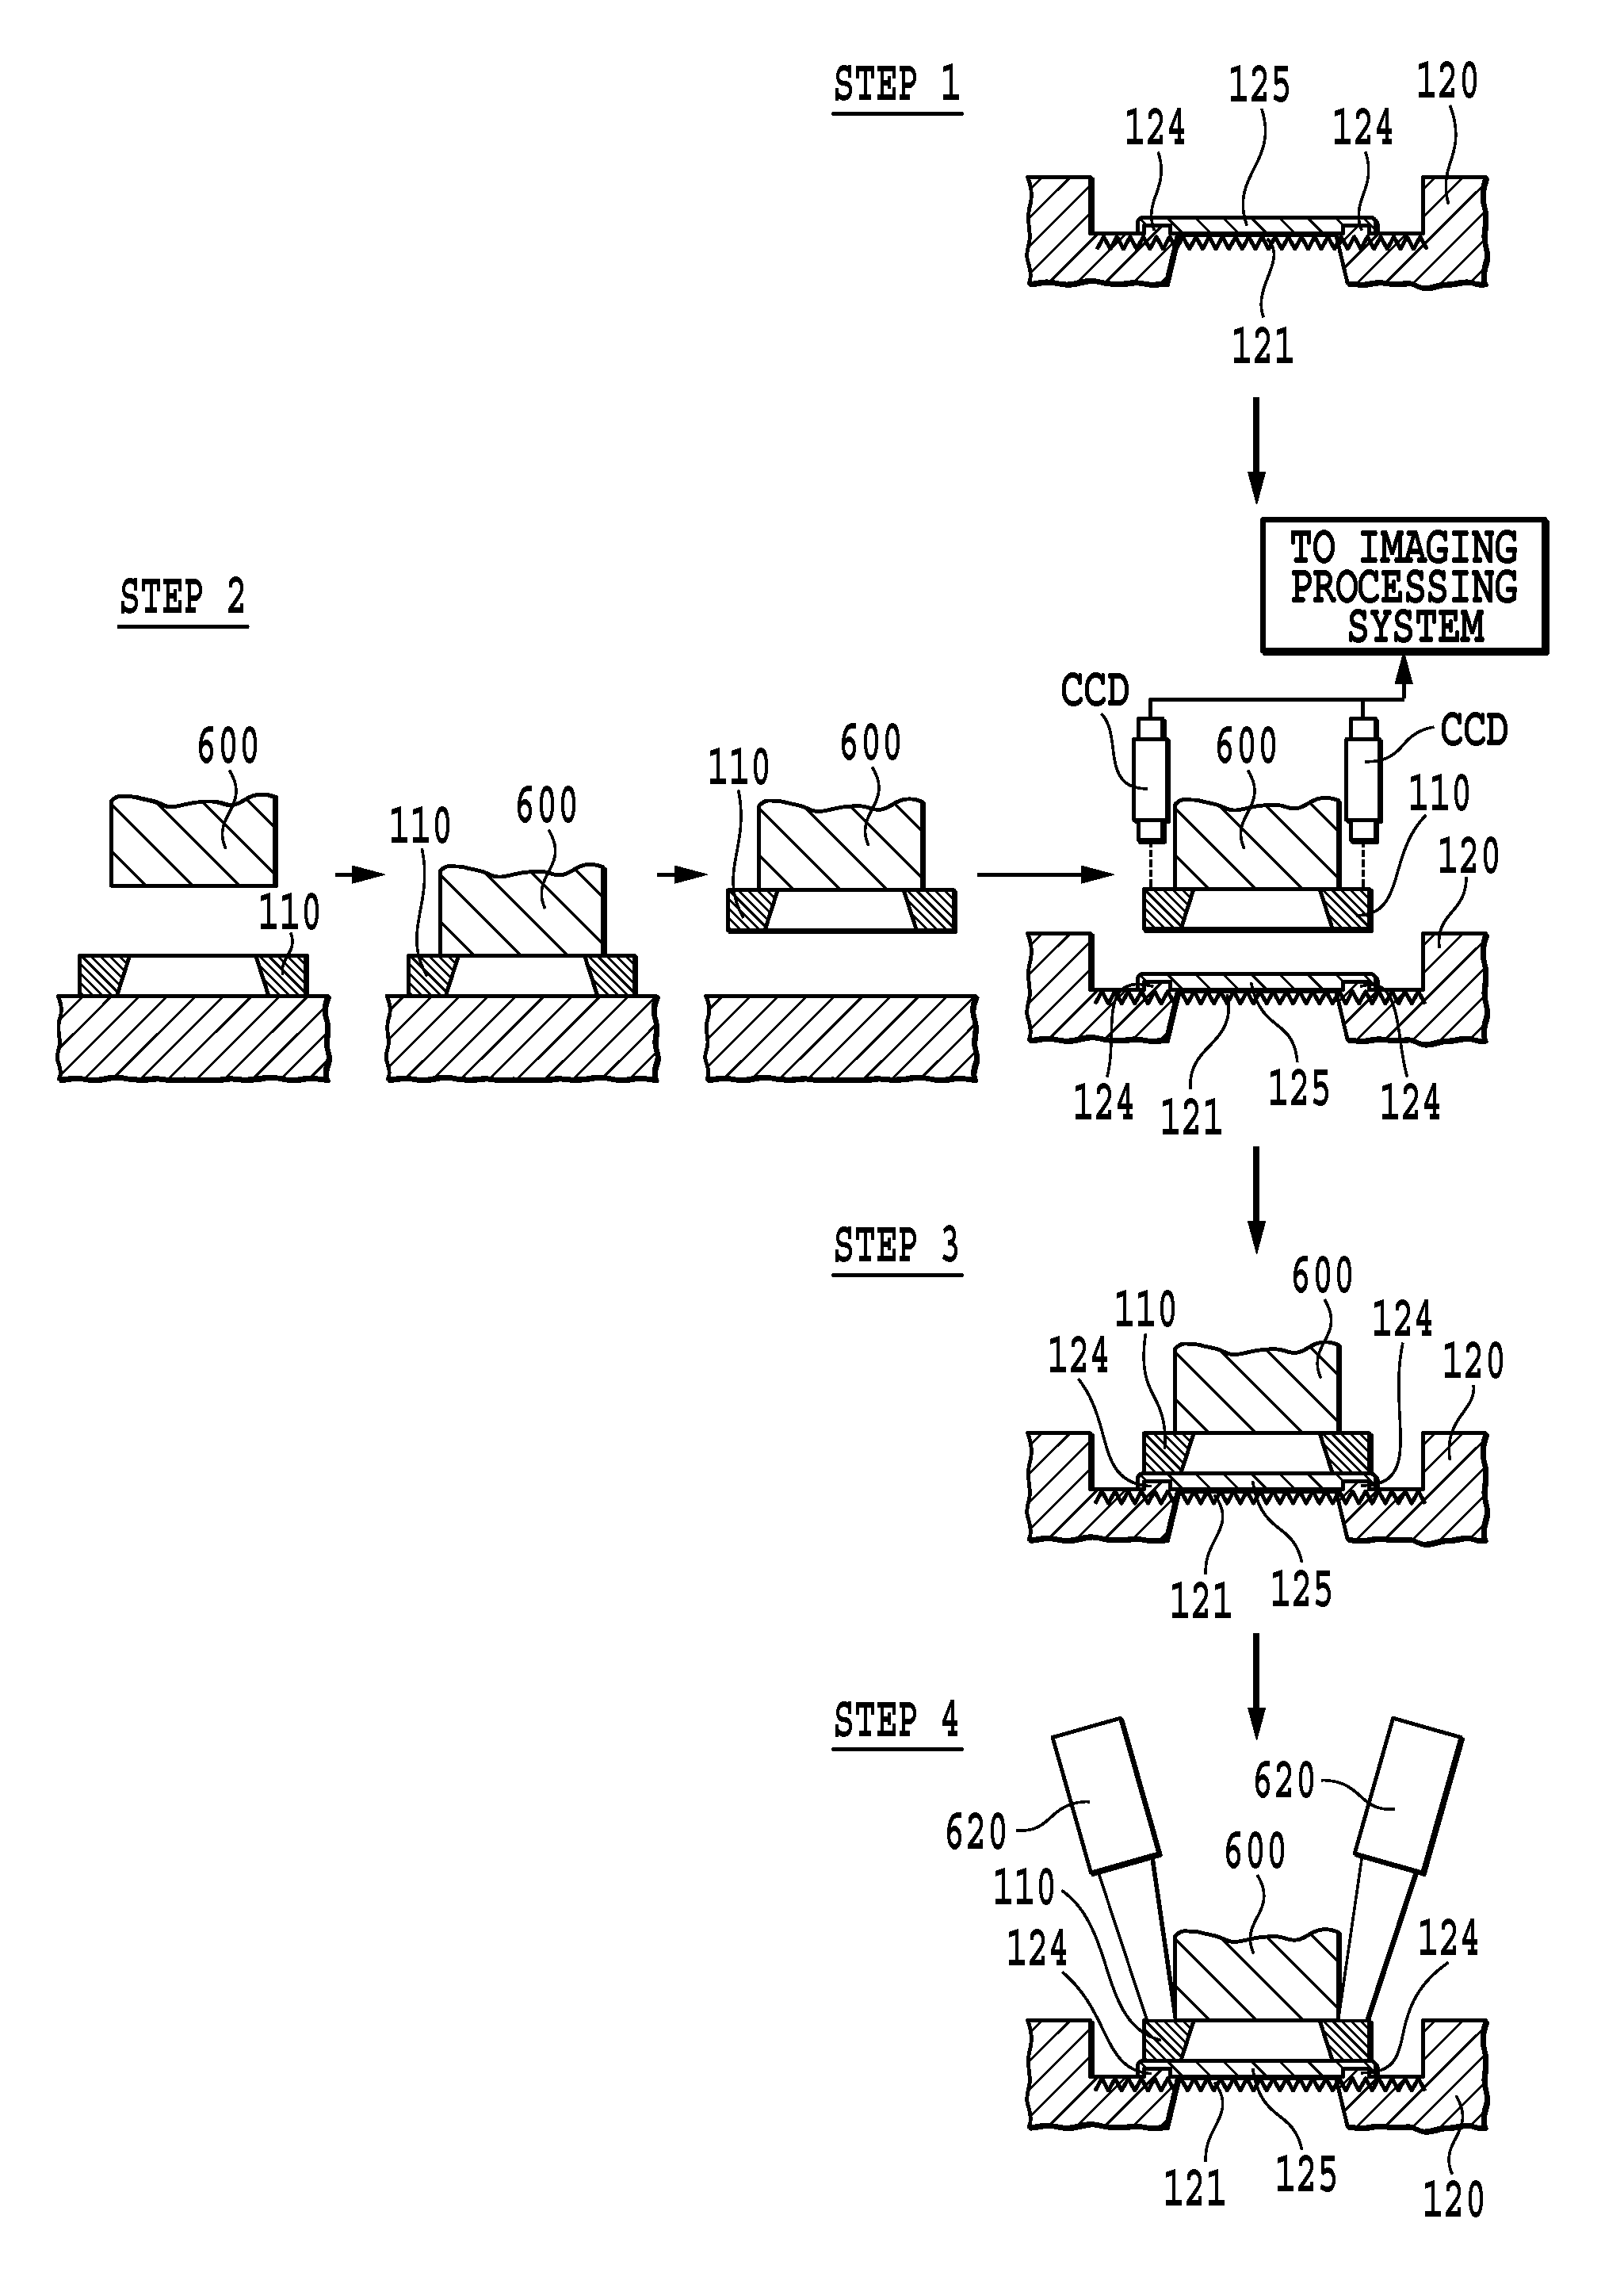 Method of manufacturing an ink jet print head